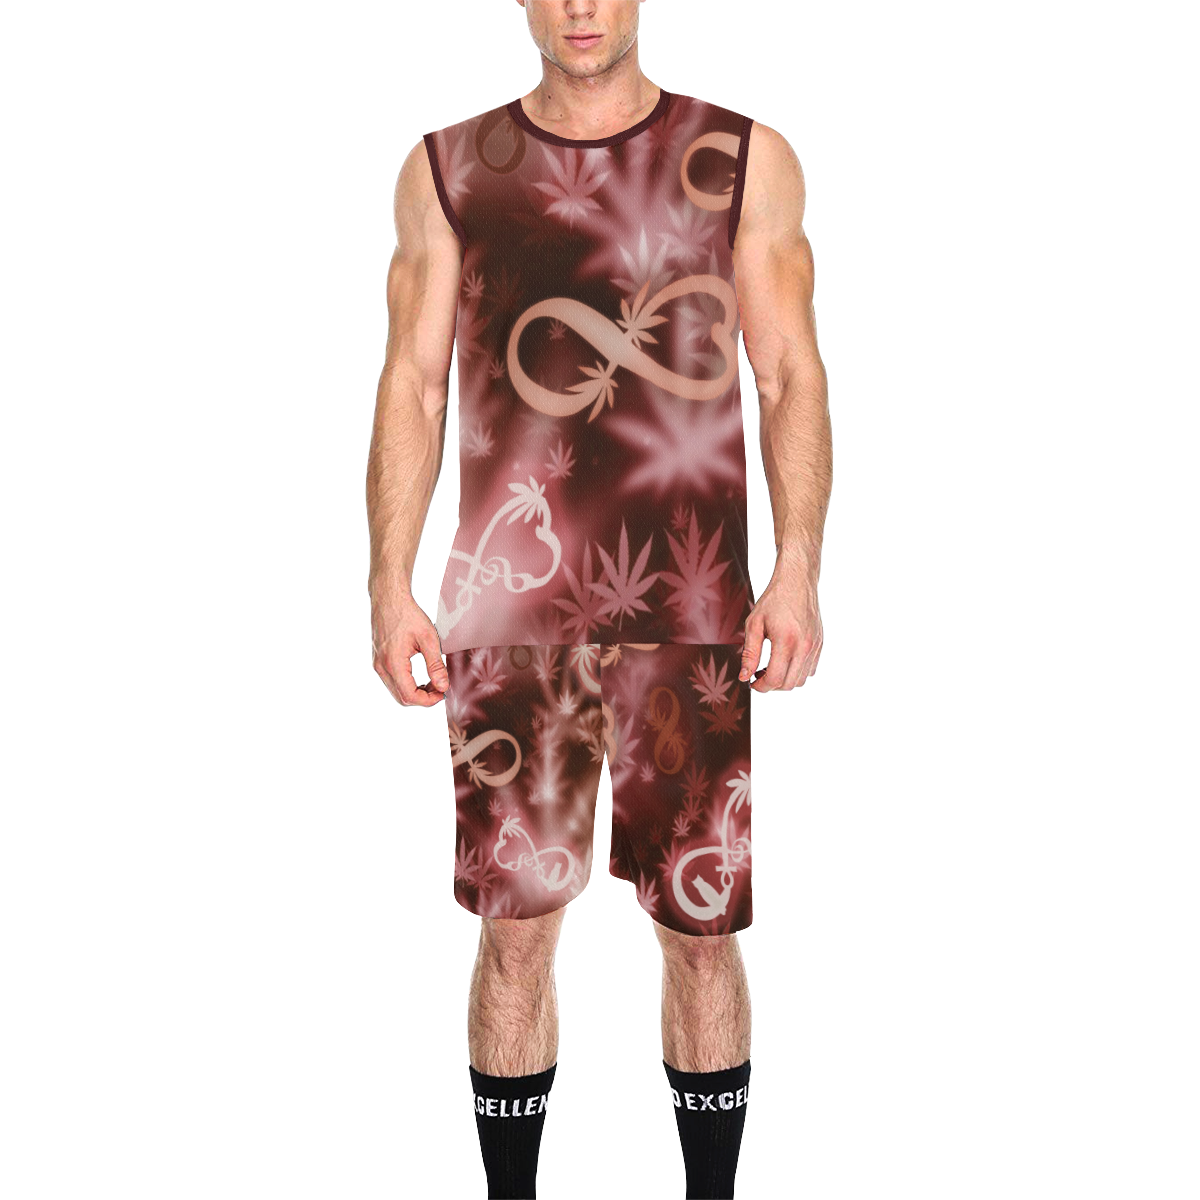 INFINITY RED COSMOS All Over Print Basketball Uniform